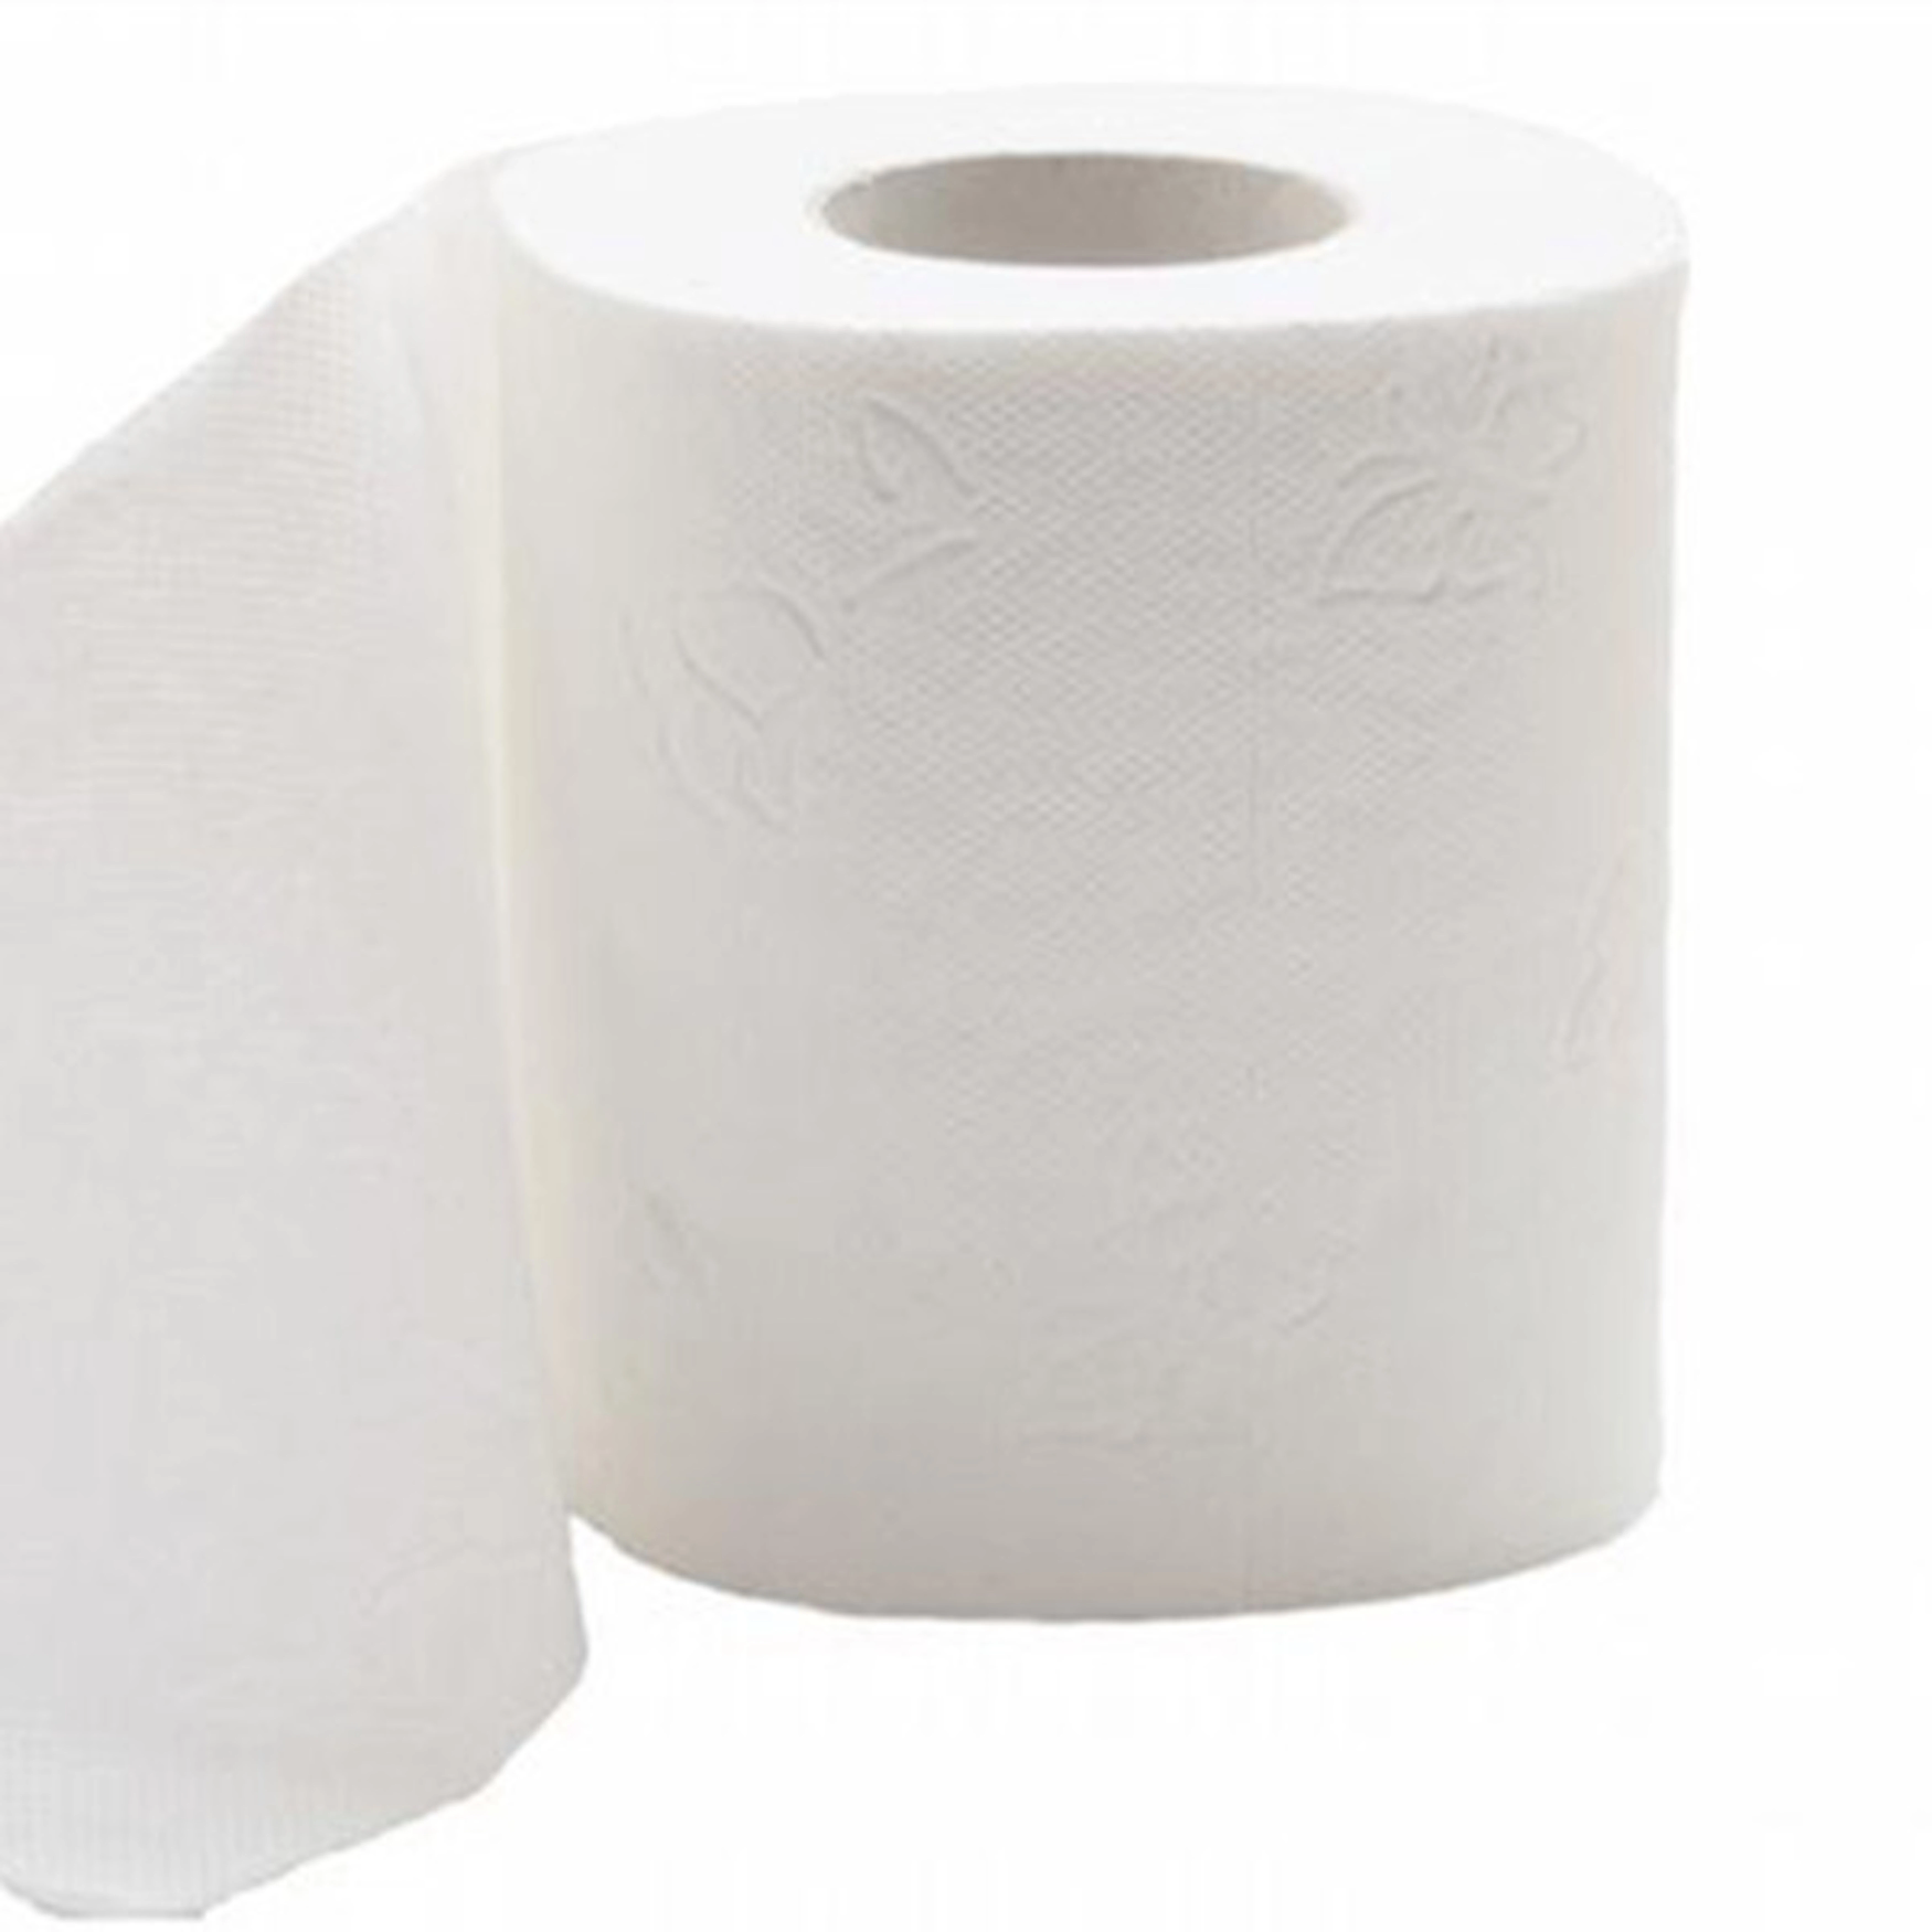 Soft Toilet Tissue Roll Papers Available